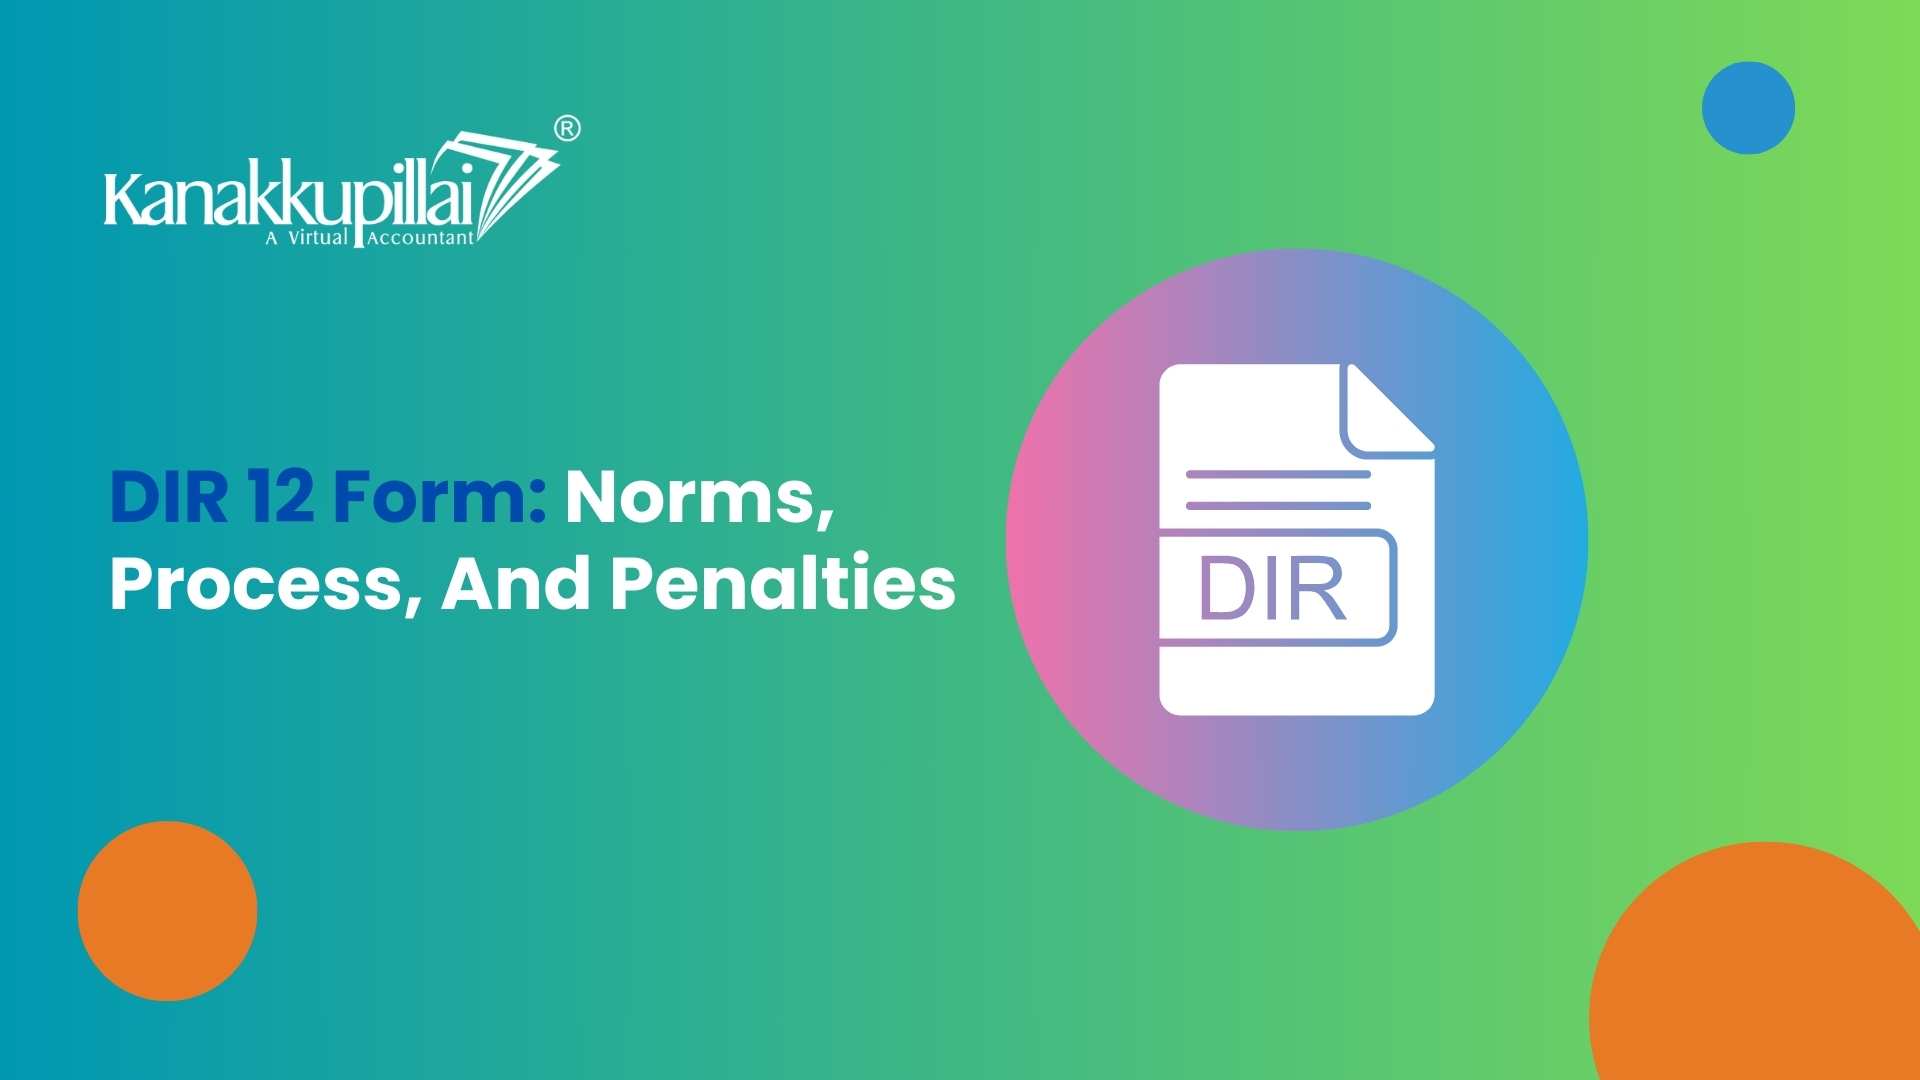 You are currently viewing DIR 12 Form: Norms, Process, And Penalties